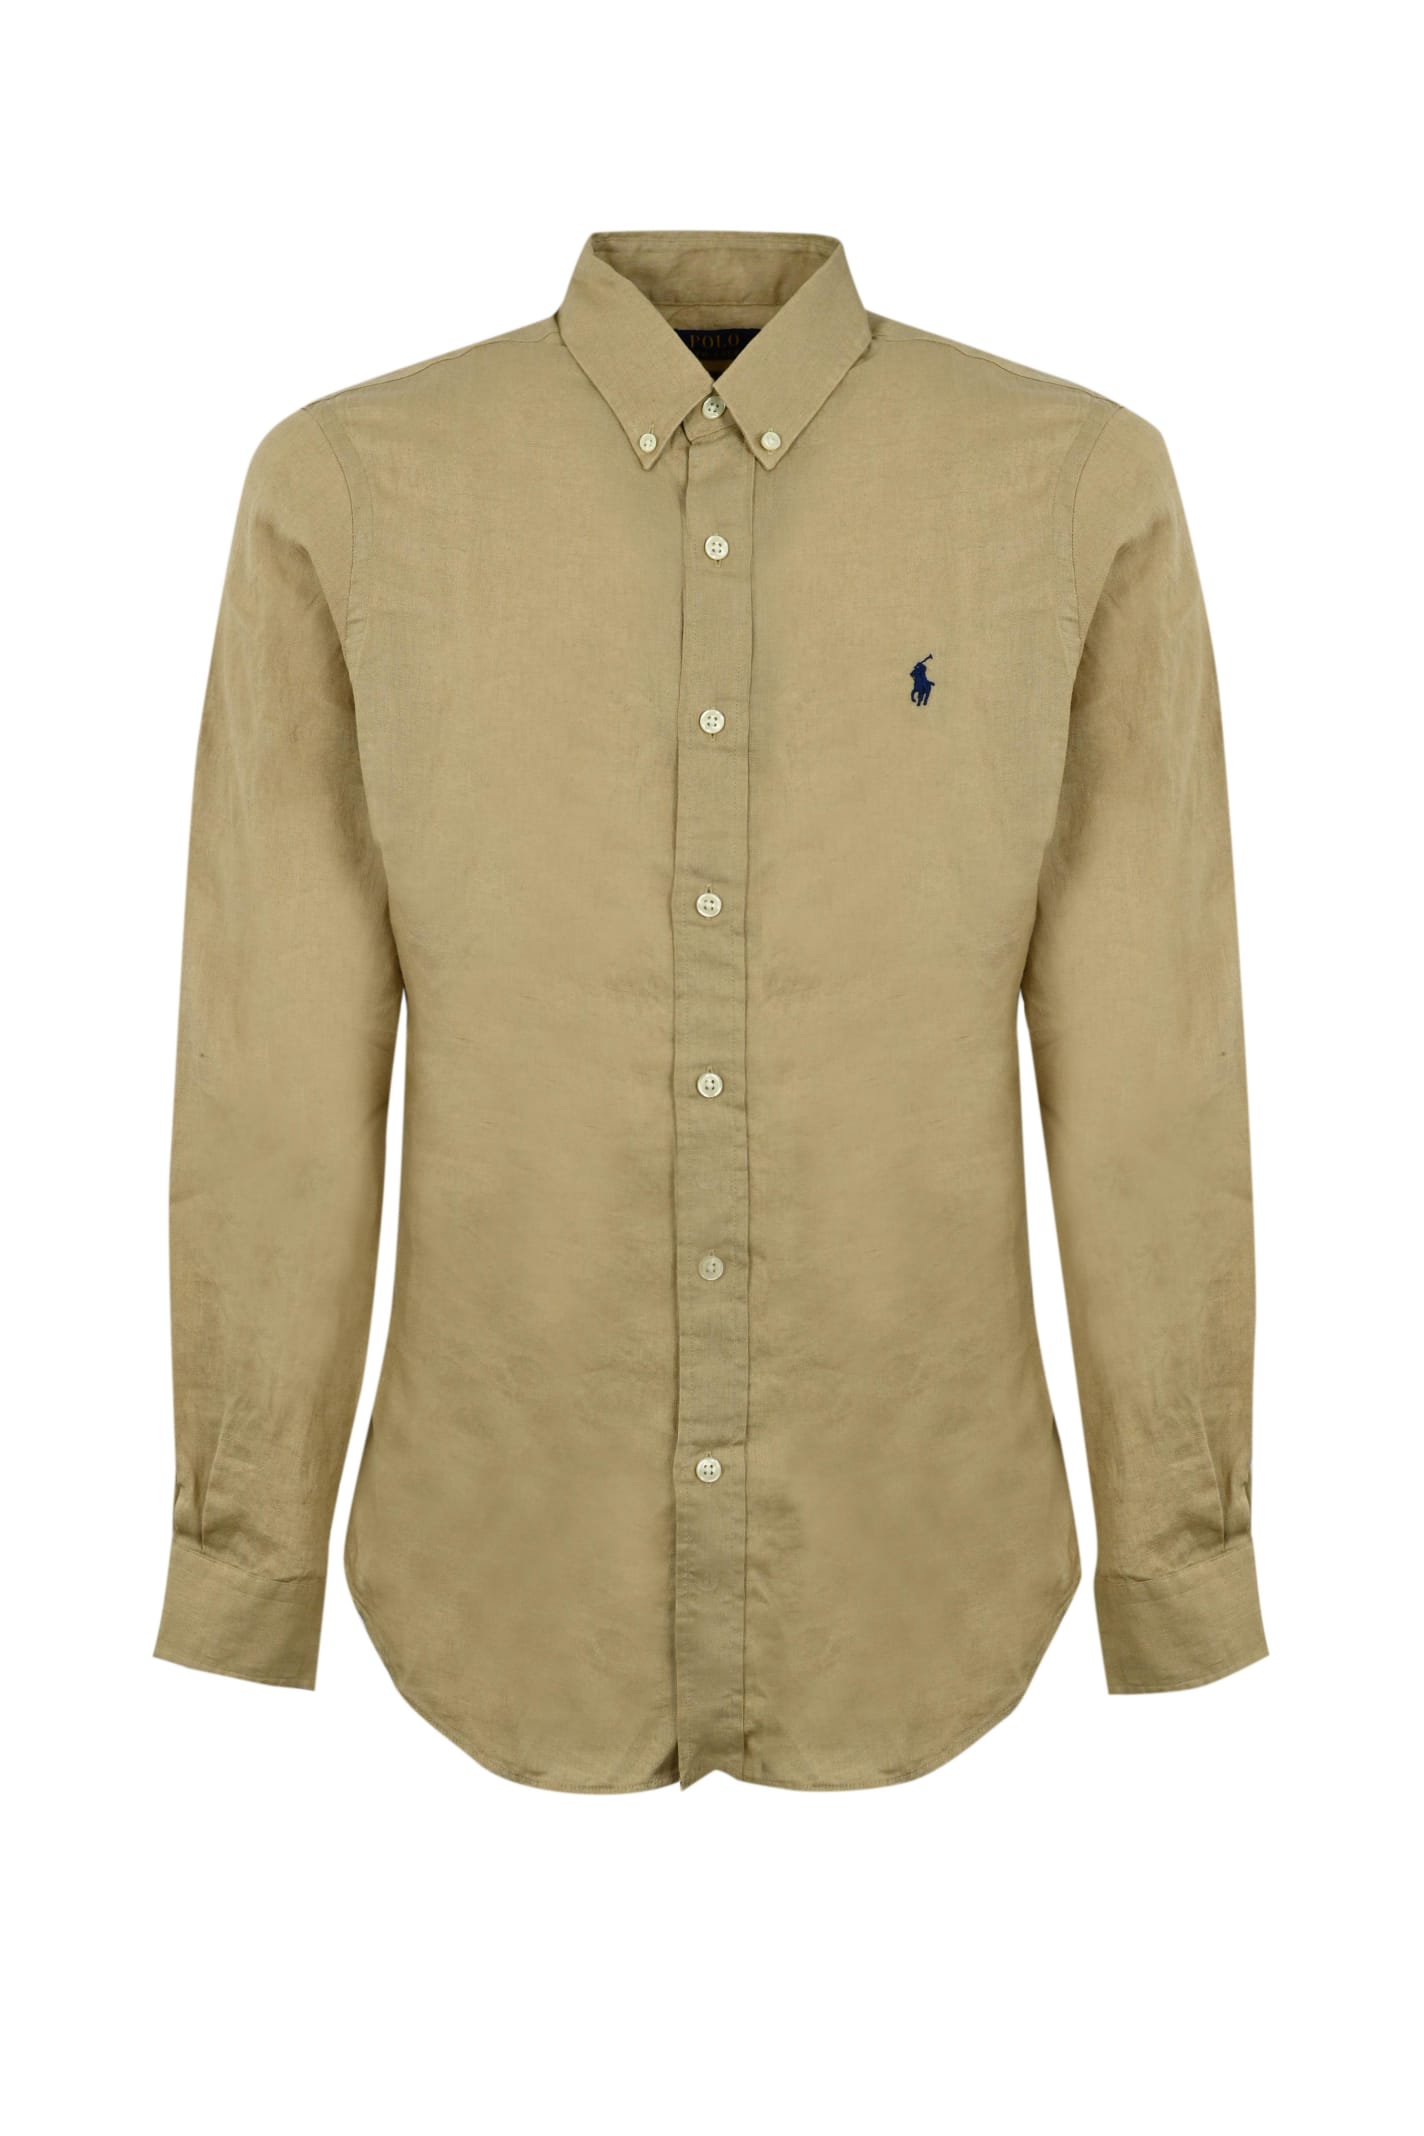 Polo Ralph Lauren Shirt With Embroidery